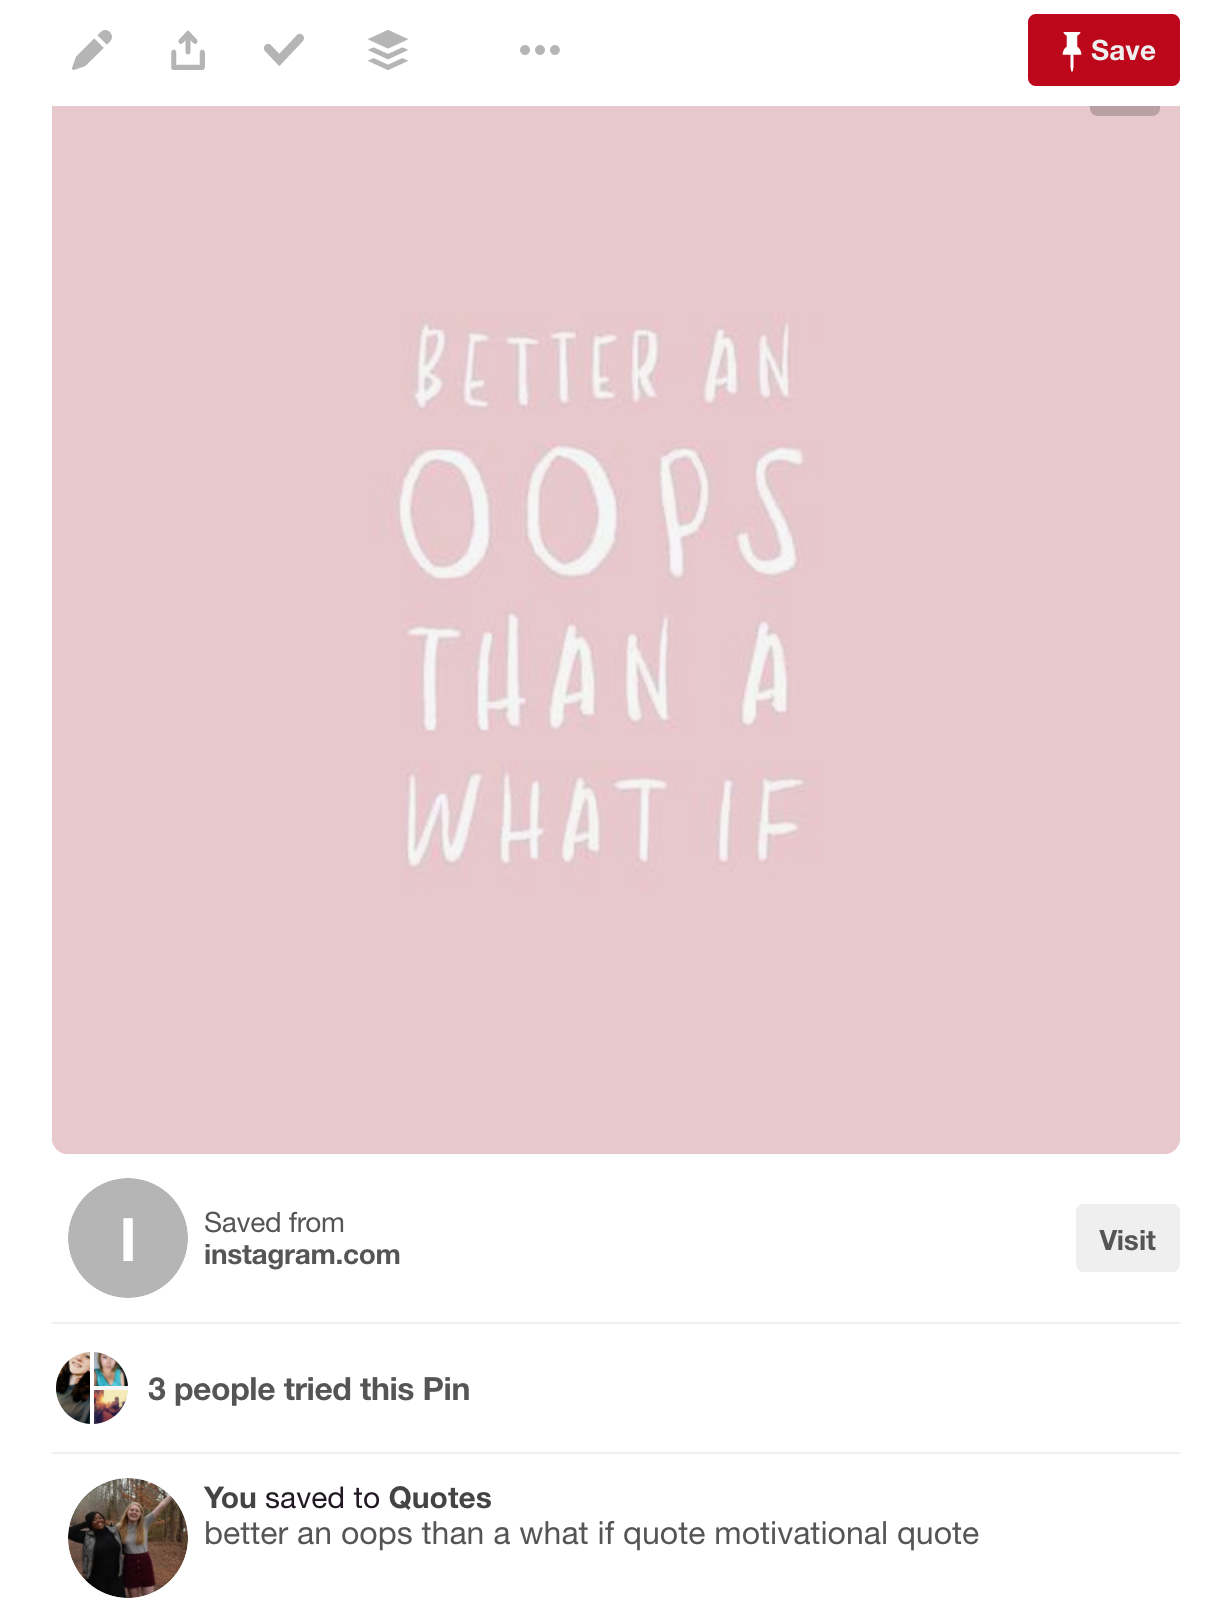 Best Time to Pin - Changing Pinterest Caption with Keywords